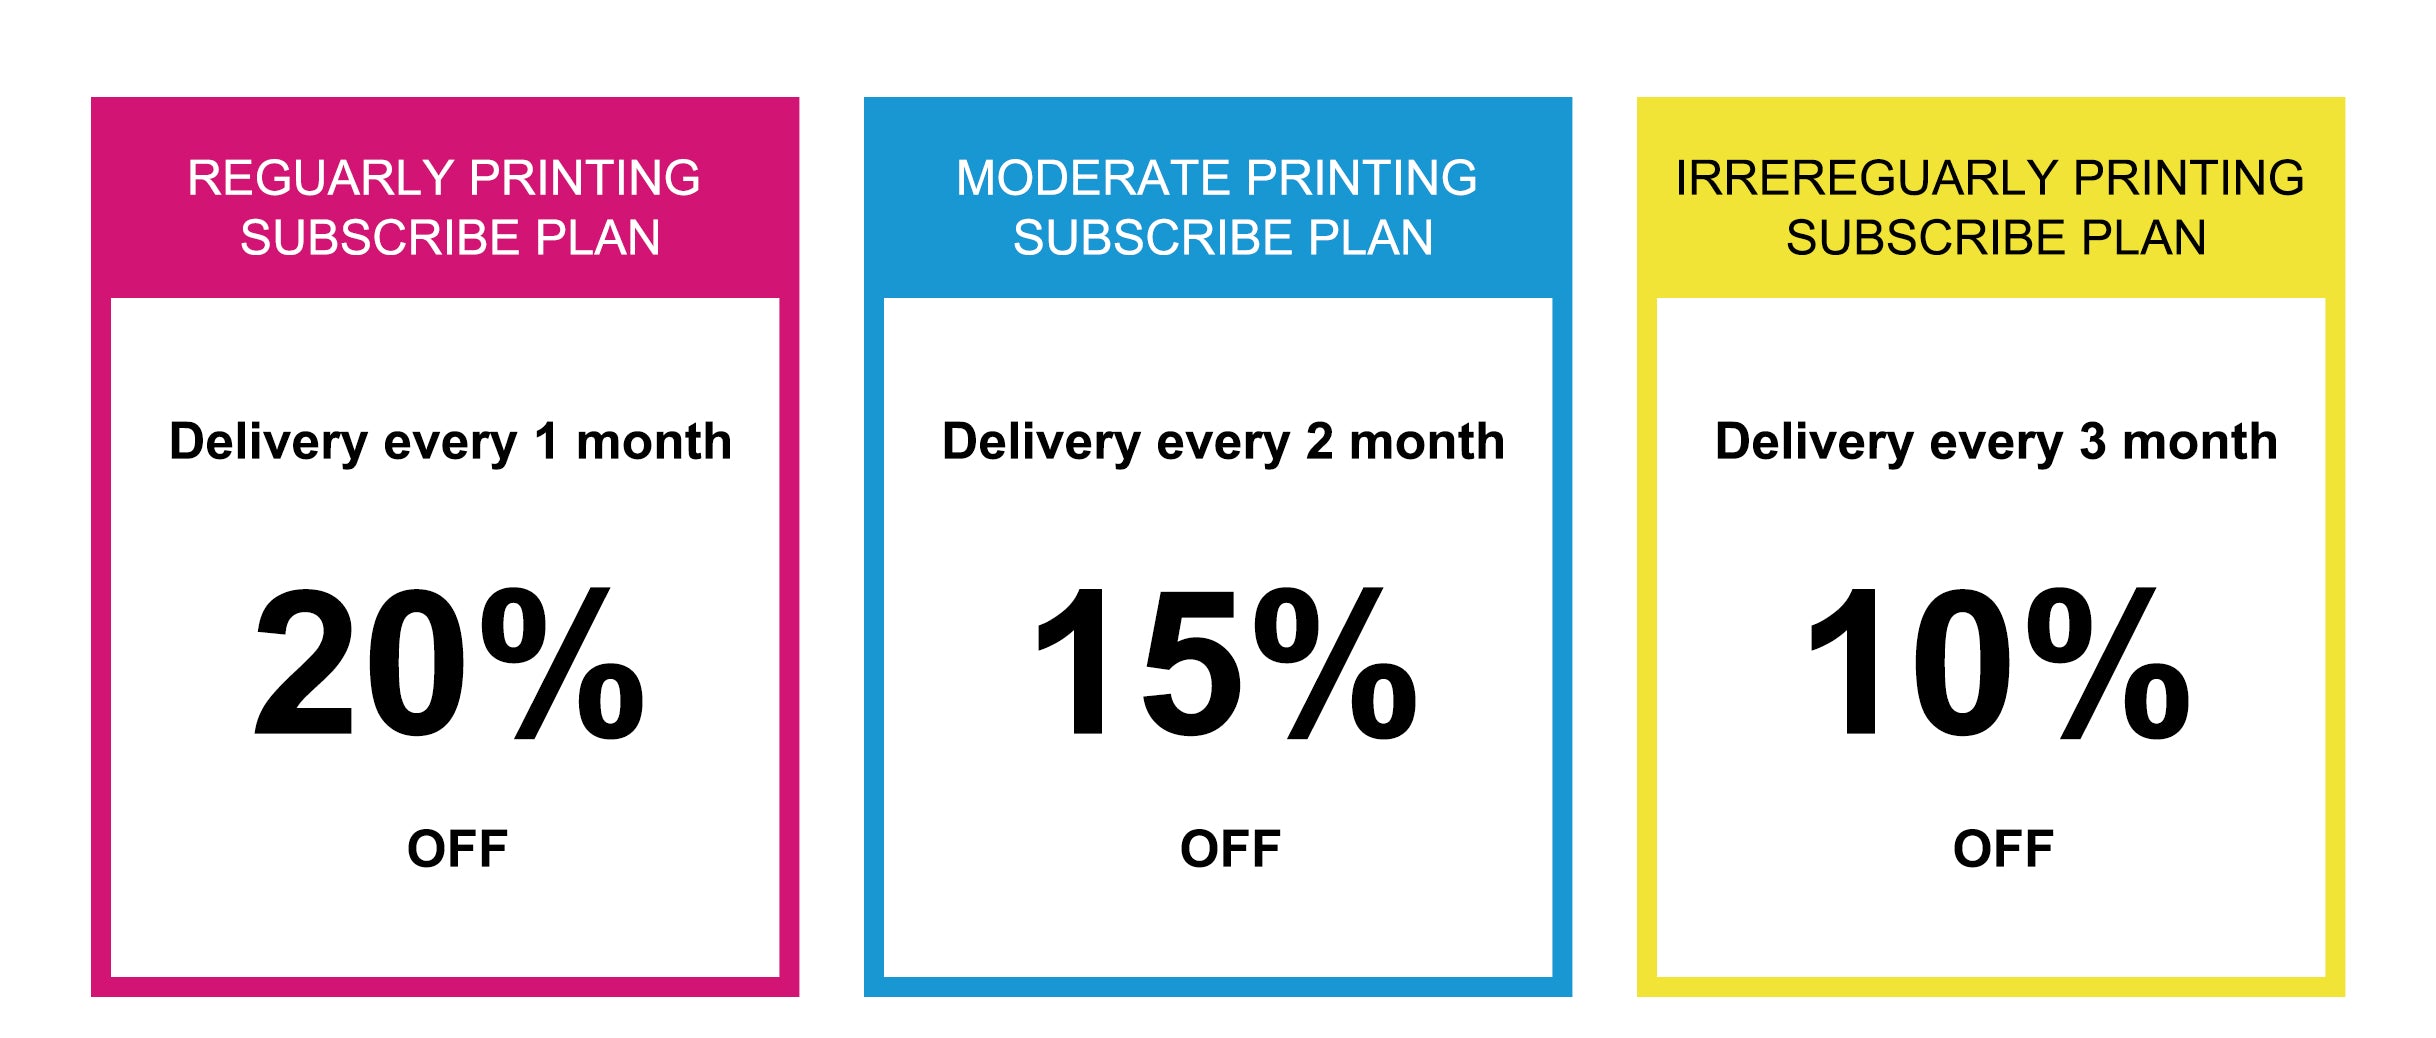 Linford Subscribe Ink Plan: Up to 20% Off Per Month Delivery All Printer Cartridges